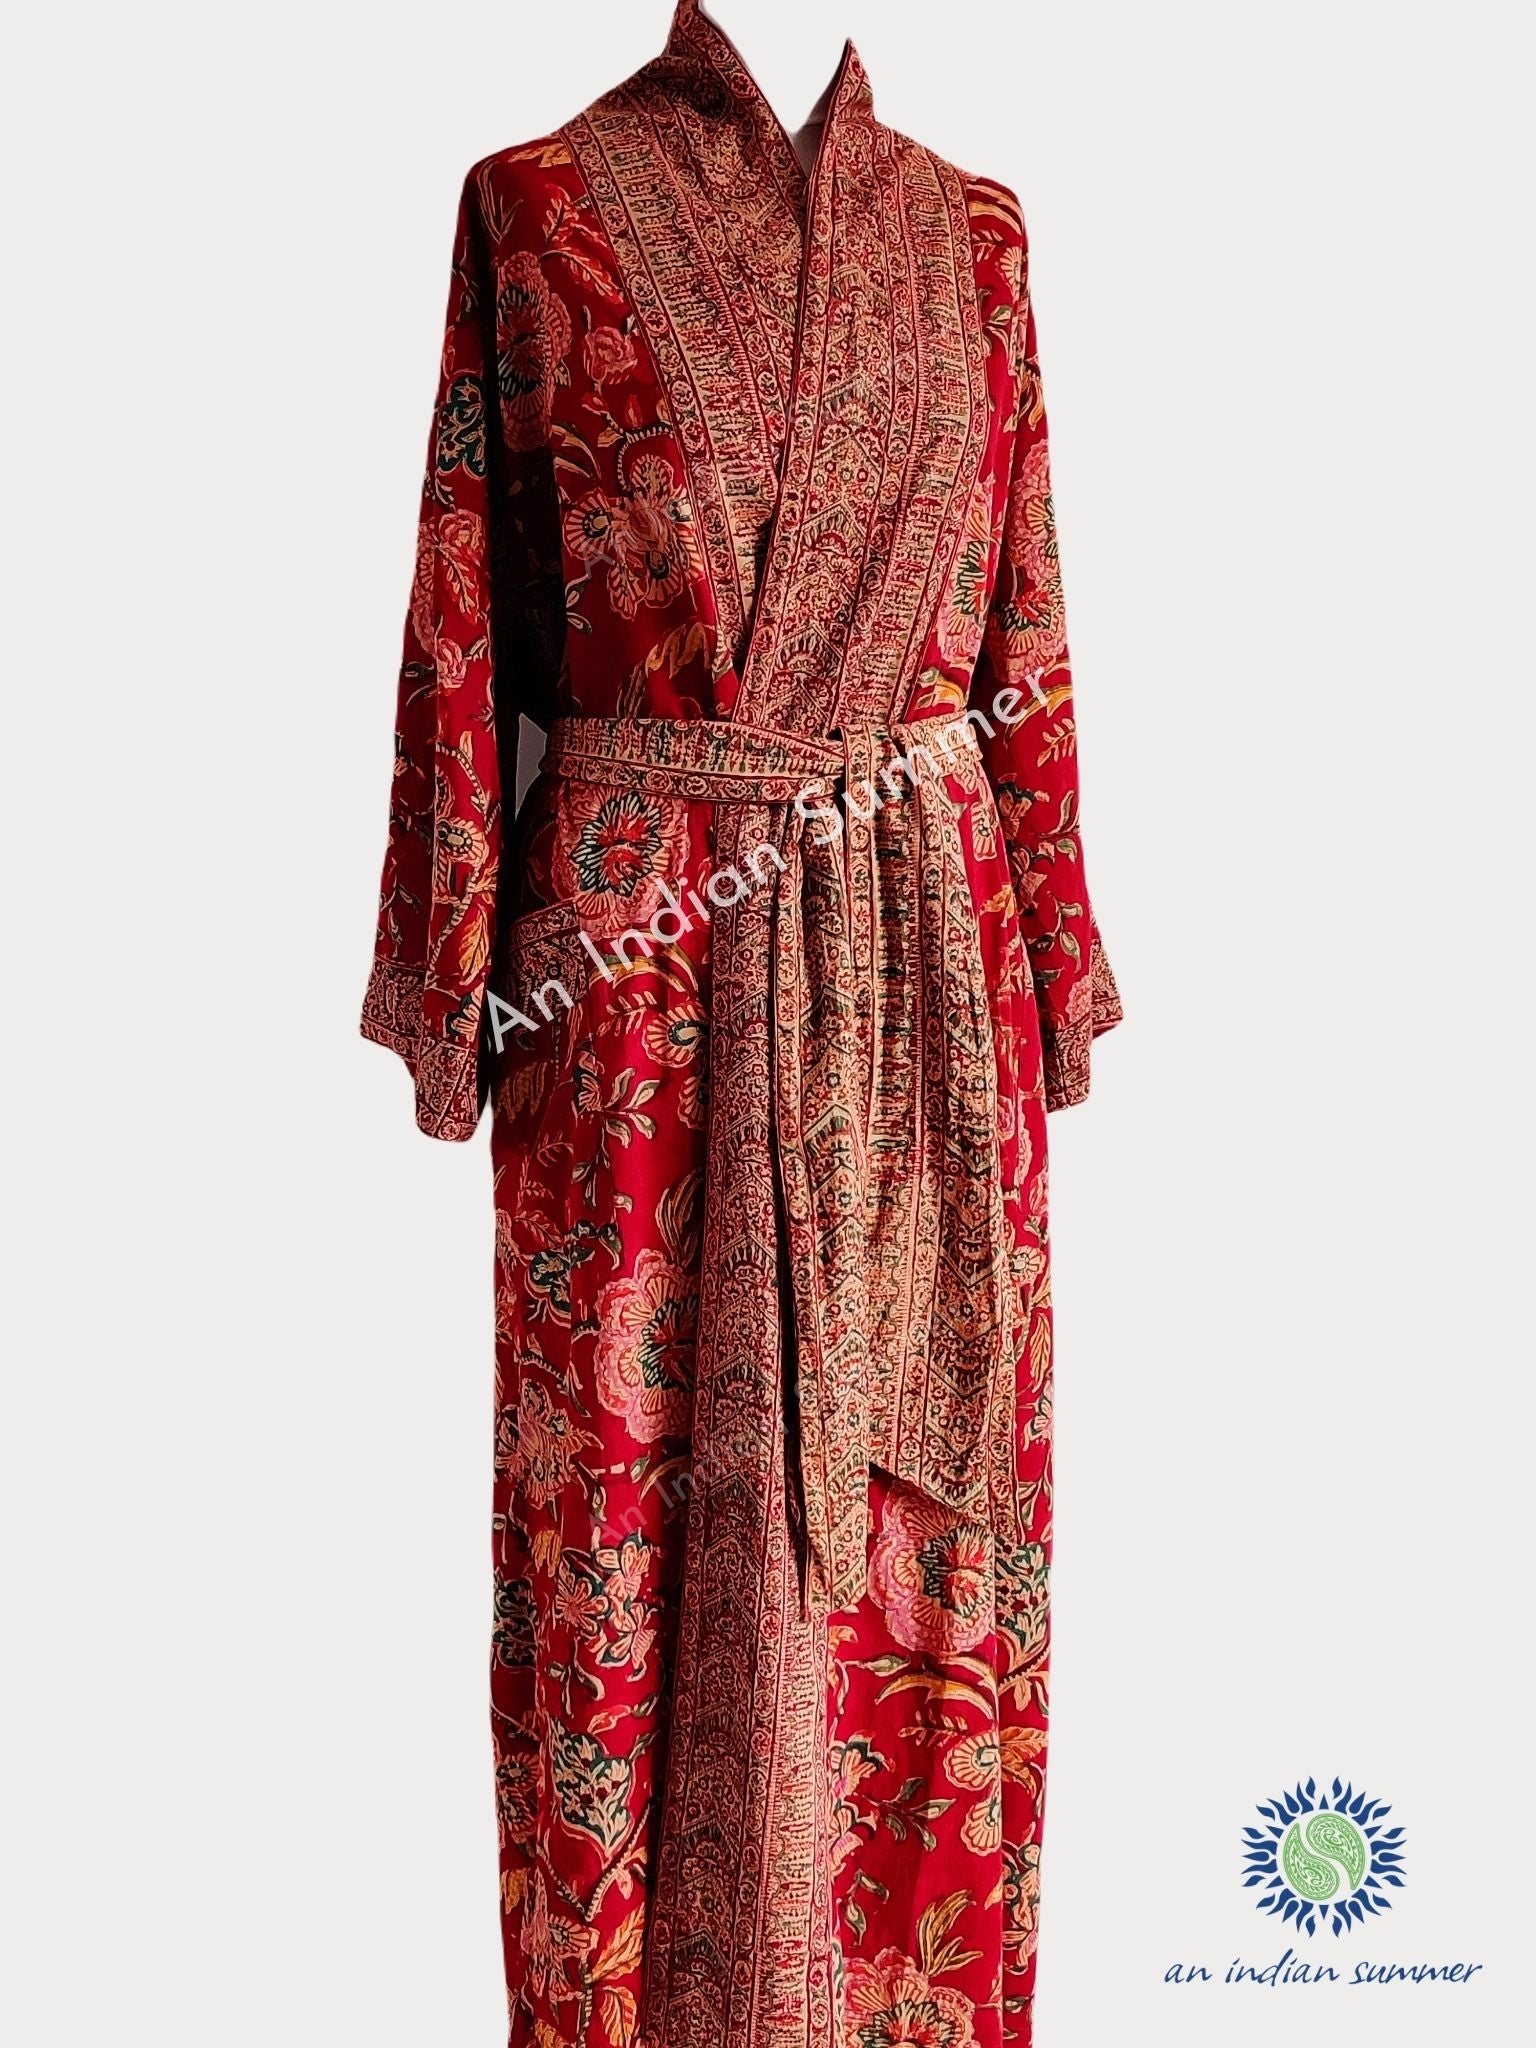 Long Kimono Robe | Tree of Life | Red | Wood Block Print | Hand Block Printed | Cotton | An Indian Summer | Seasonless Timeless Sustainable Ethical Authentic Artisan Conscious Clothing Lifestyle Brand